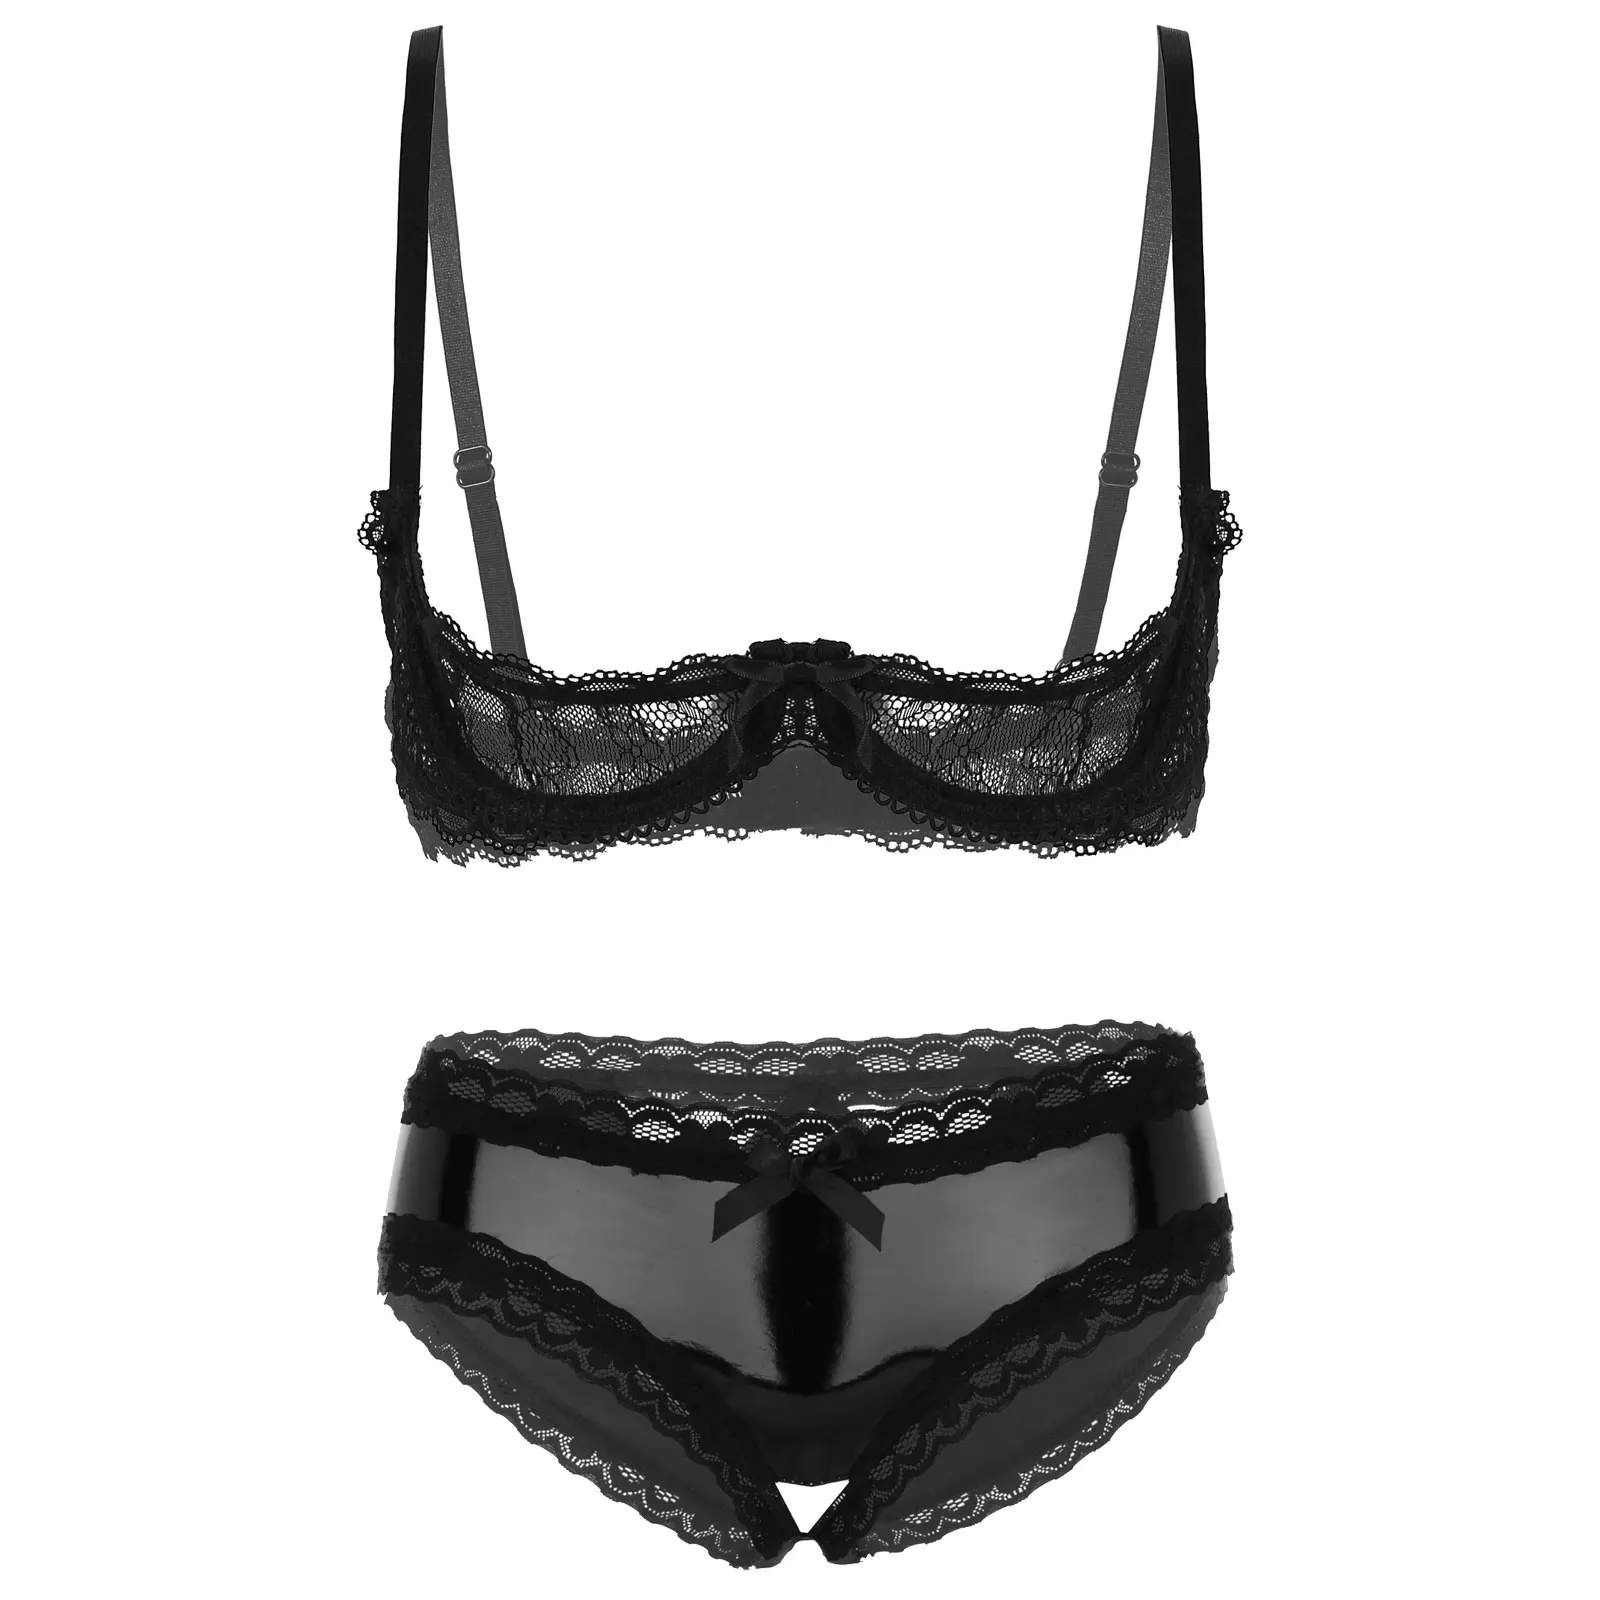 

Women's Two-piece latex Lingerie Suit Exotic Sets Honeymoon Gift See-through Sheer Lace Bra Tops with Leather Crotchless Briefs